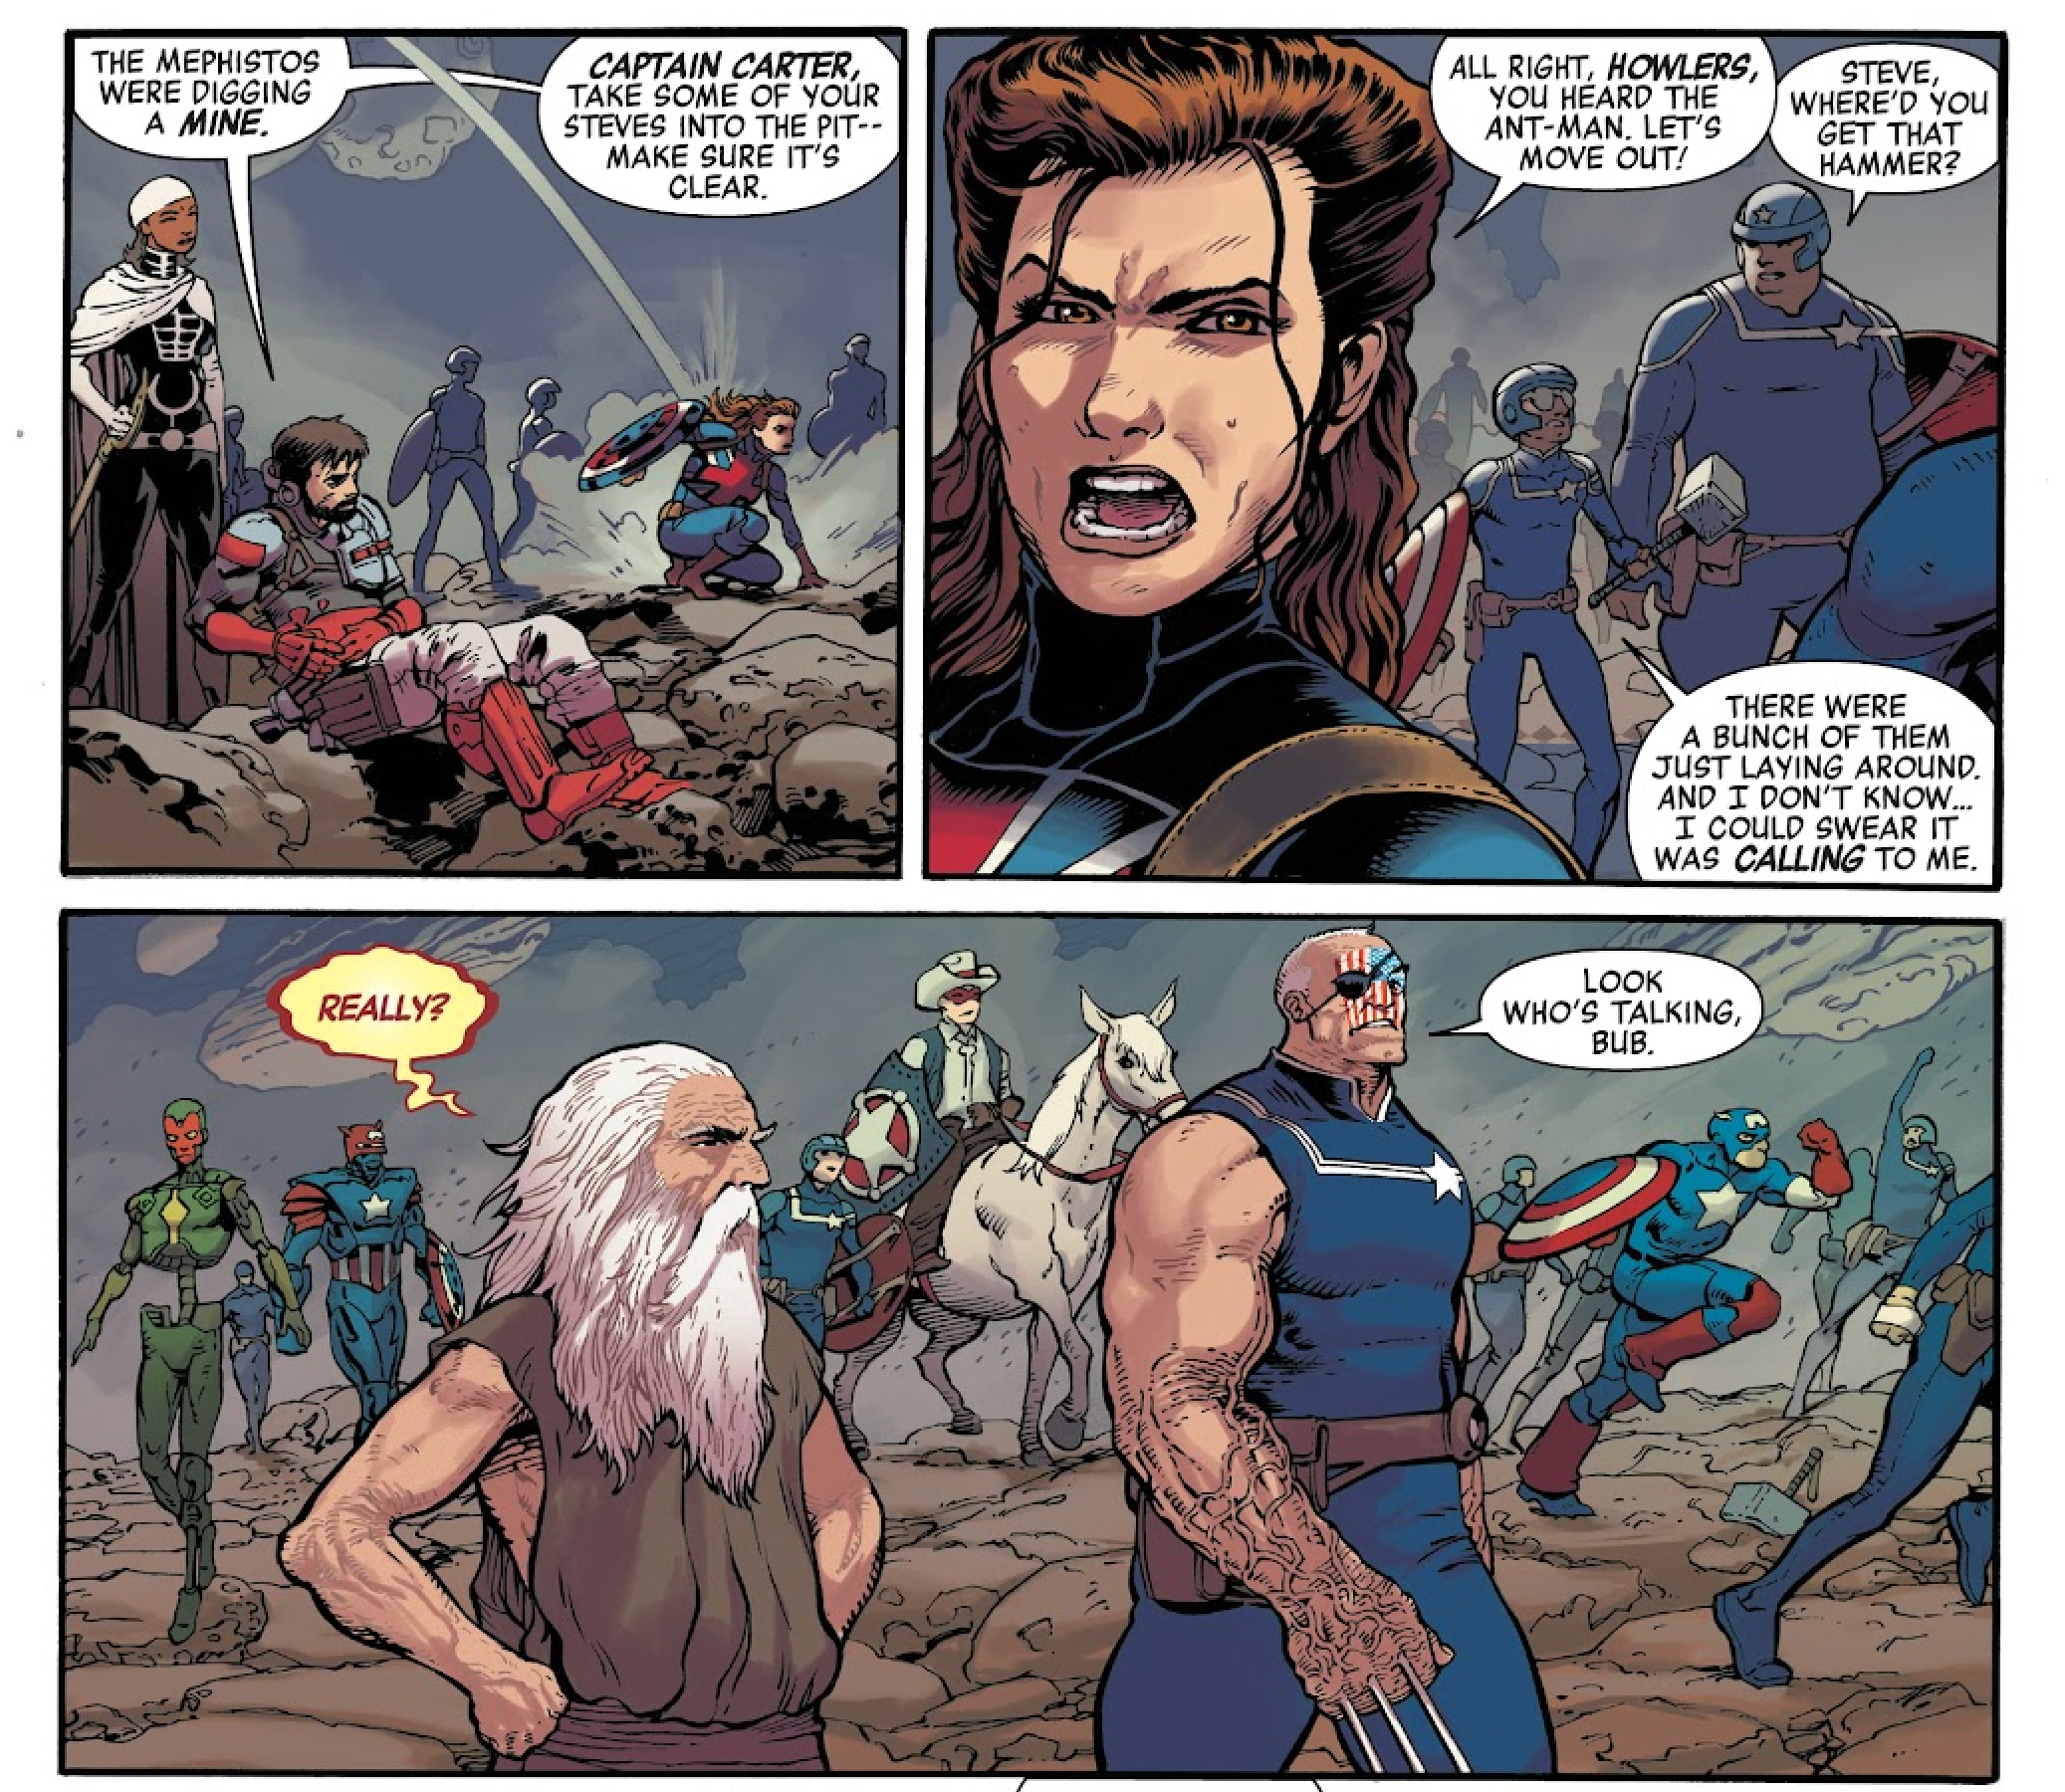 Multiverse Captain America lifts Thor's hammer